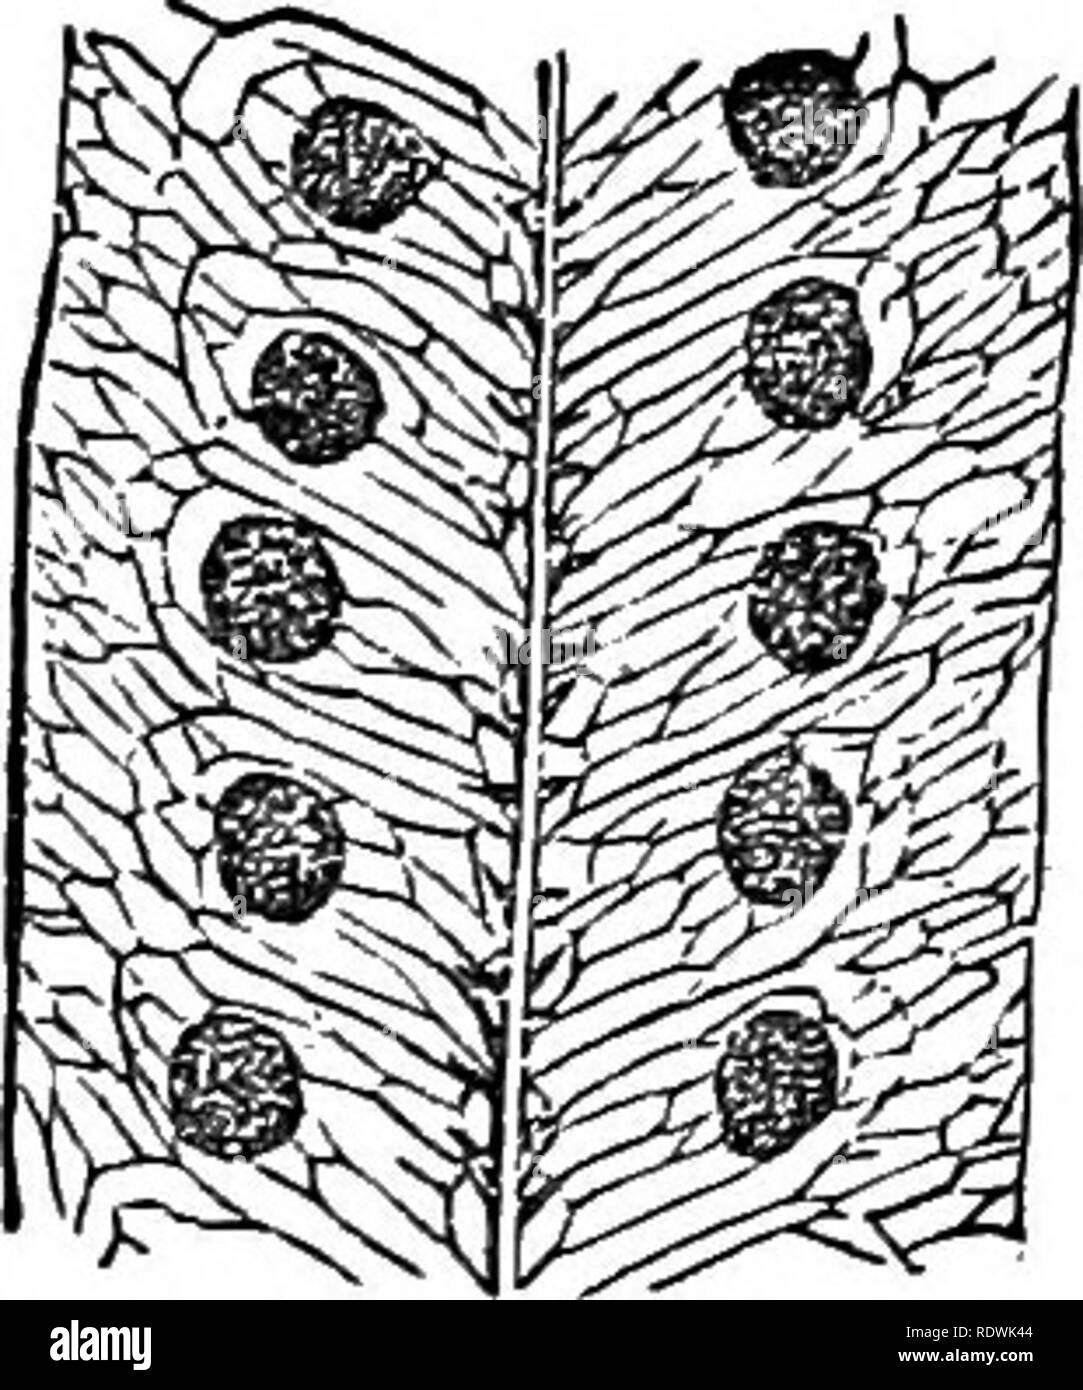 . Ferns: British &amp; foreign. The history, organography, classification, and enumeration of the species of garden ferns with a treatise on their cultivation, etc. etc. Ferns. 86 FEENS : BEITISH AND FOEEIGN. 2. A. Owariensis, /. Sin. Polypodium Owariense, Besv.; Iiowe'i Ferns, 2, t. 62. Gonioplilebium Owariense, Lodd.—Sierra Leone. 3. A. lyeopodioides, /. Sm. Polypodium lycopodioides, Linn.; Phim. Fil. t. 119. Pleopeltis lyeopodioides, Fresl.—&quot;West Indies. 4. A. nitida, J. 8m. En. Fil. Sort. Kew. (1846). Pleopeltis nitida, Moore.—Honduras. 5. A. stigmatica, J. Sm. Polypodium stigmaticum, Stock Photo